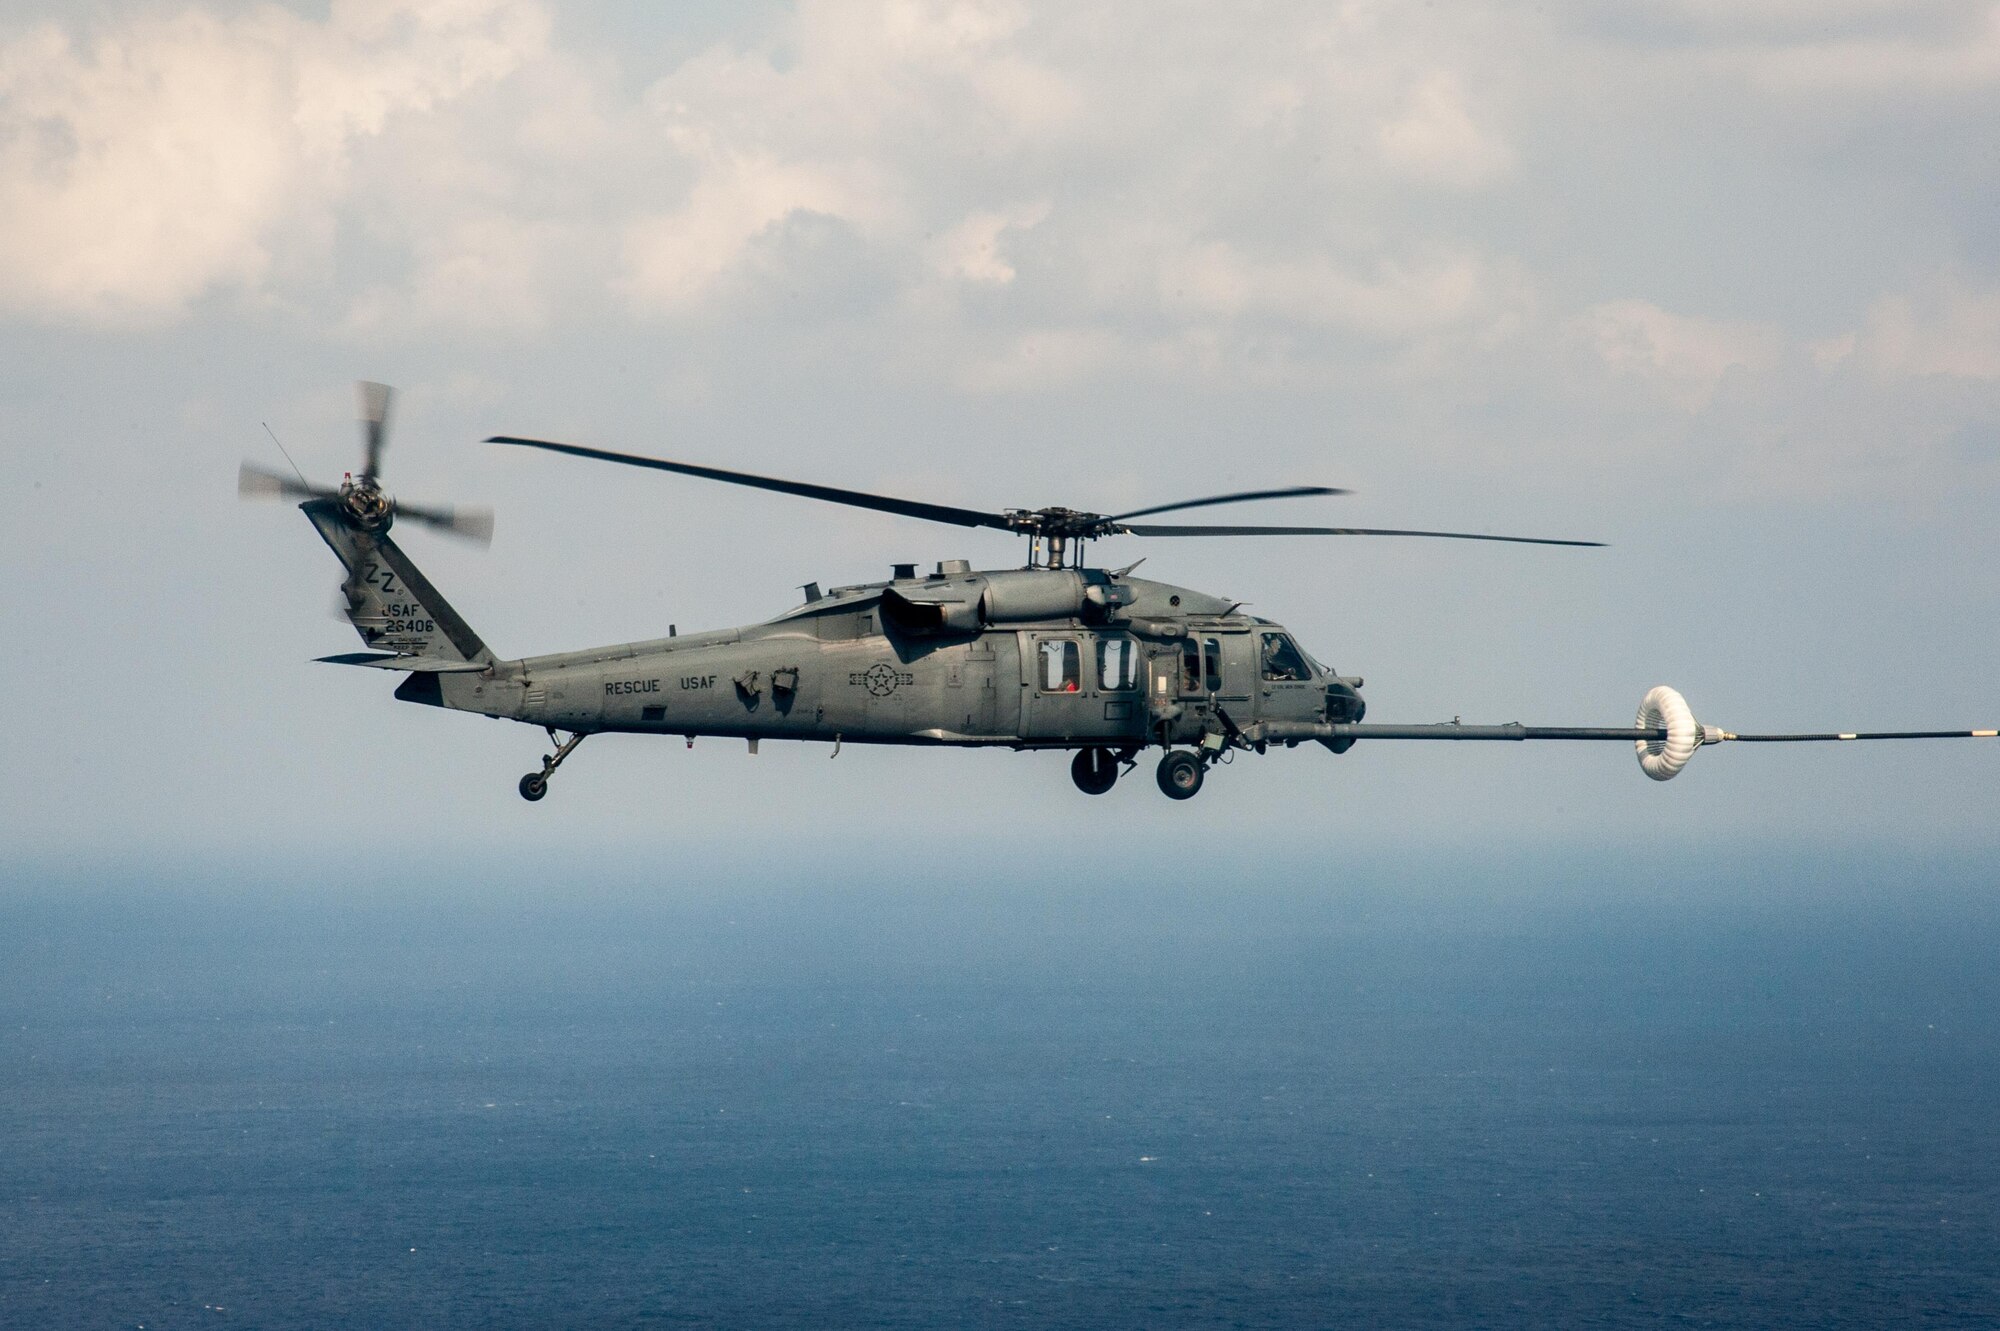 The Air Force has used Pave Hawks since 1982 in an array of combat and humanitarian search and rescue operations. Air Force rescue squadrons frequently train on a multitude of scenarios in order to stay prepared for potential real-world contingencies and operations. (U.S. Air Force photo by Senior Airman John Linzmeier) 